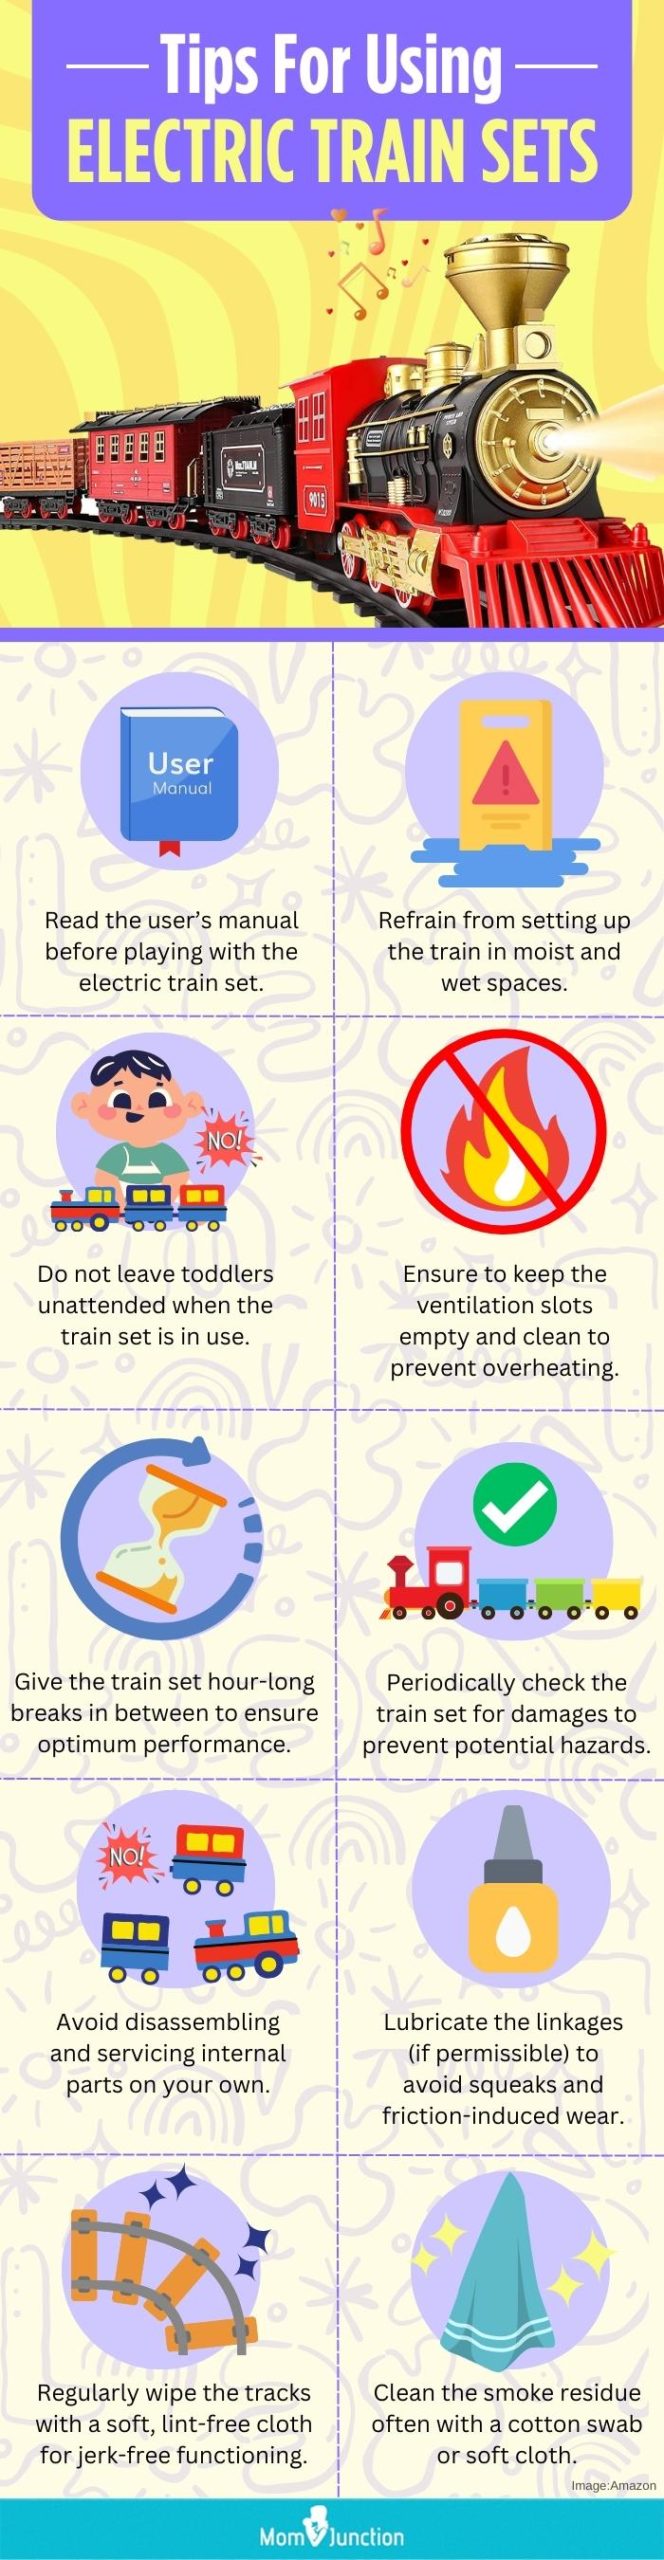 Tips For Using Electric Train Sets (infographic)